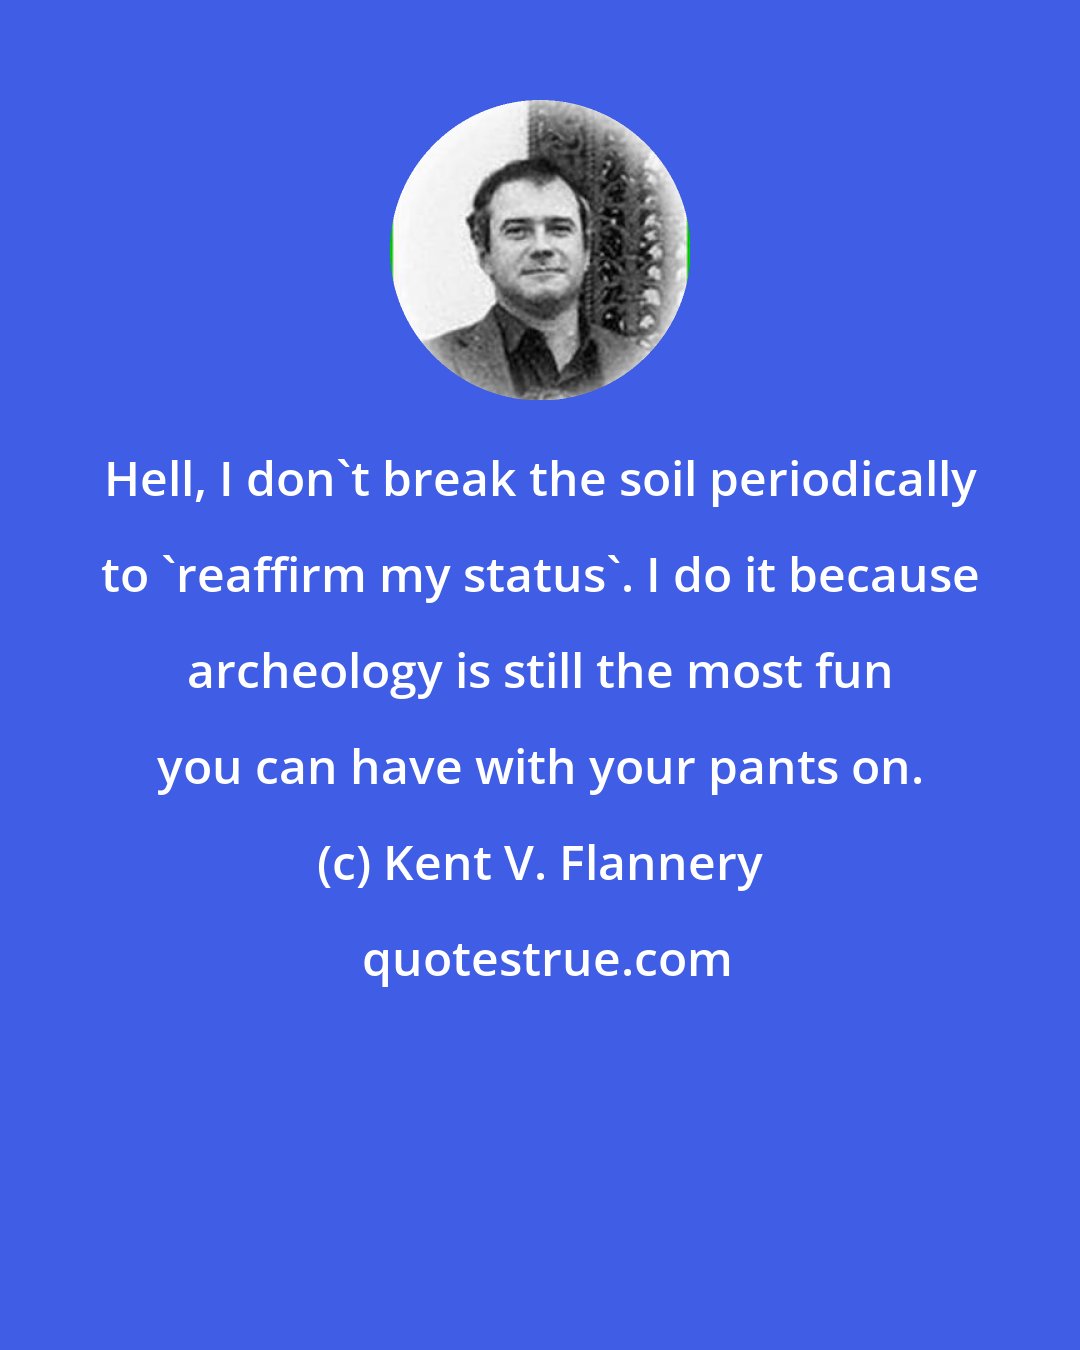 Kent V. Flannery: Hell, I don't break the soil periodically to 'reaffirm my status'. I do it because archeology is still the most fun you can have with your pants on.